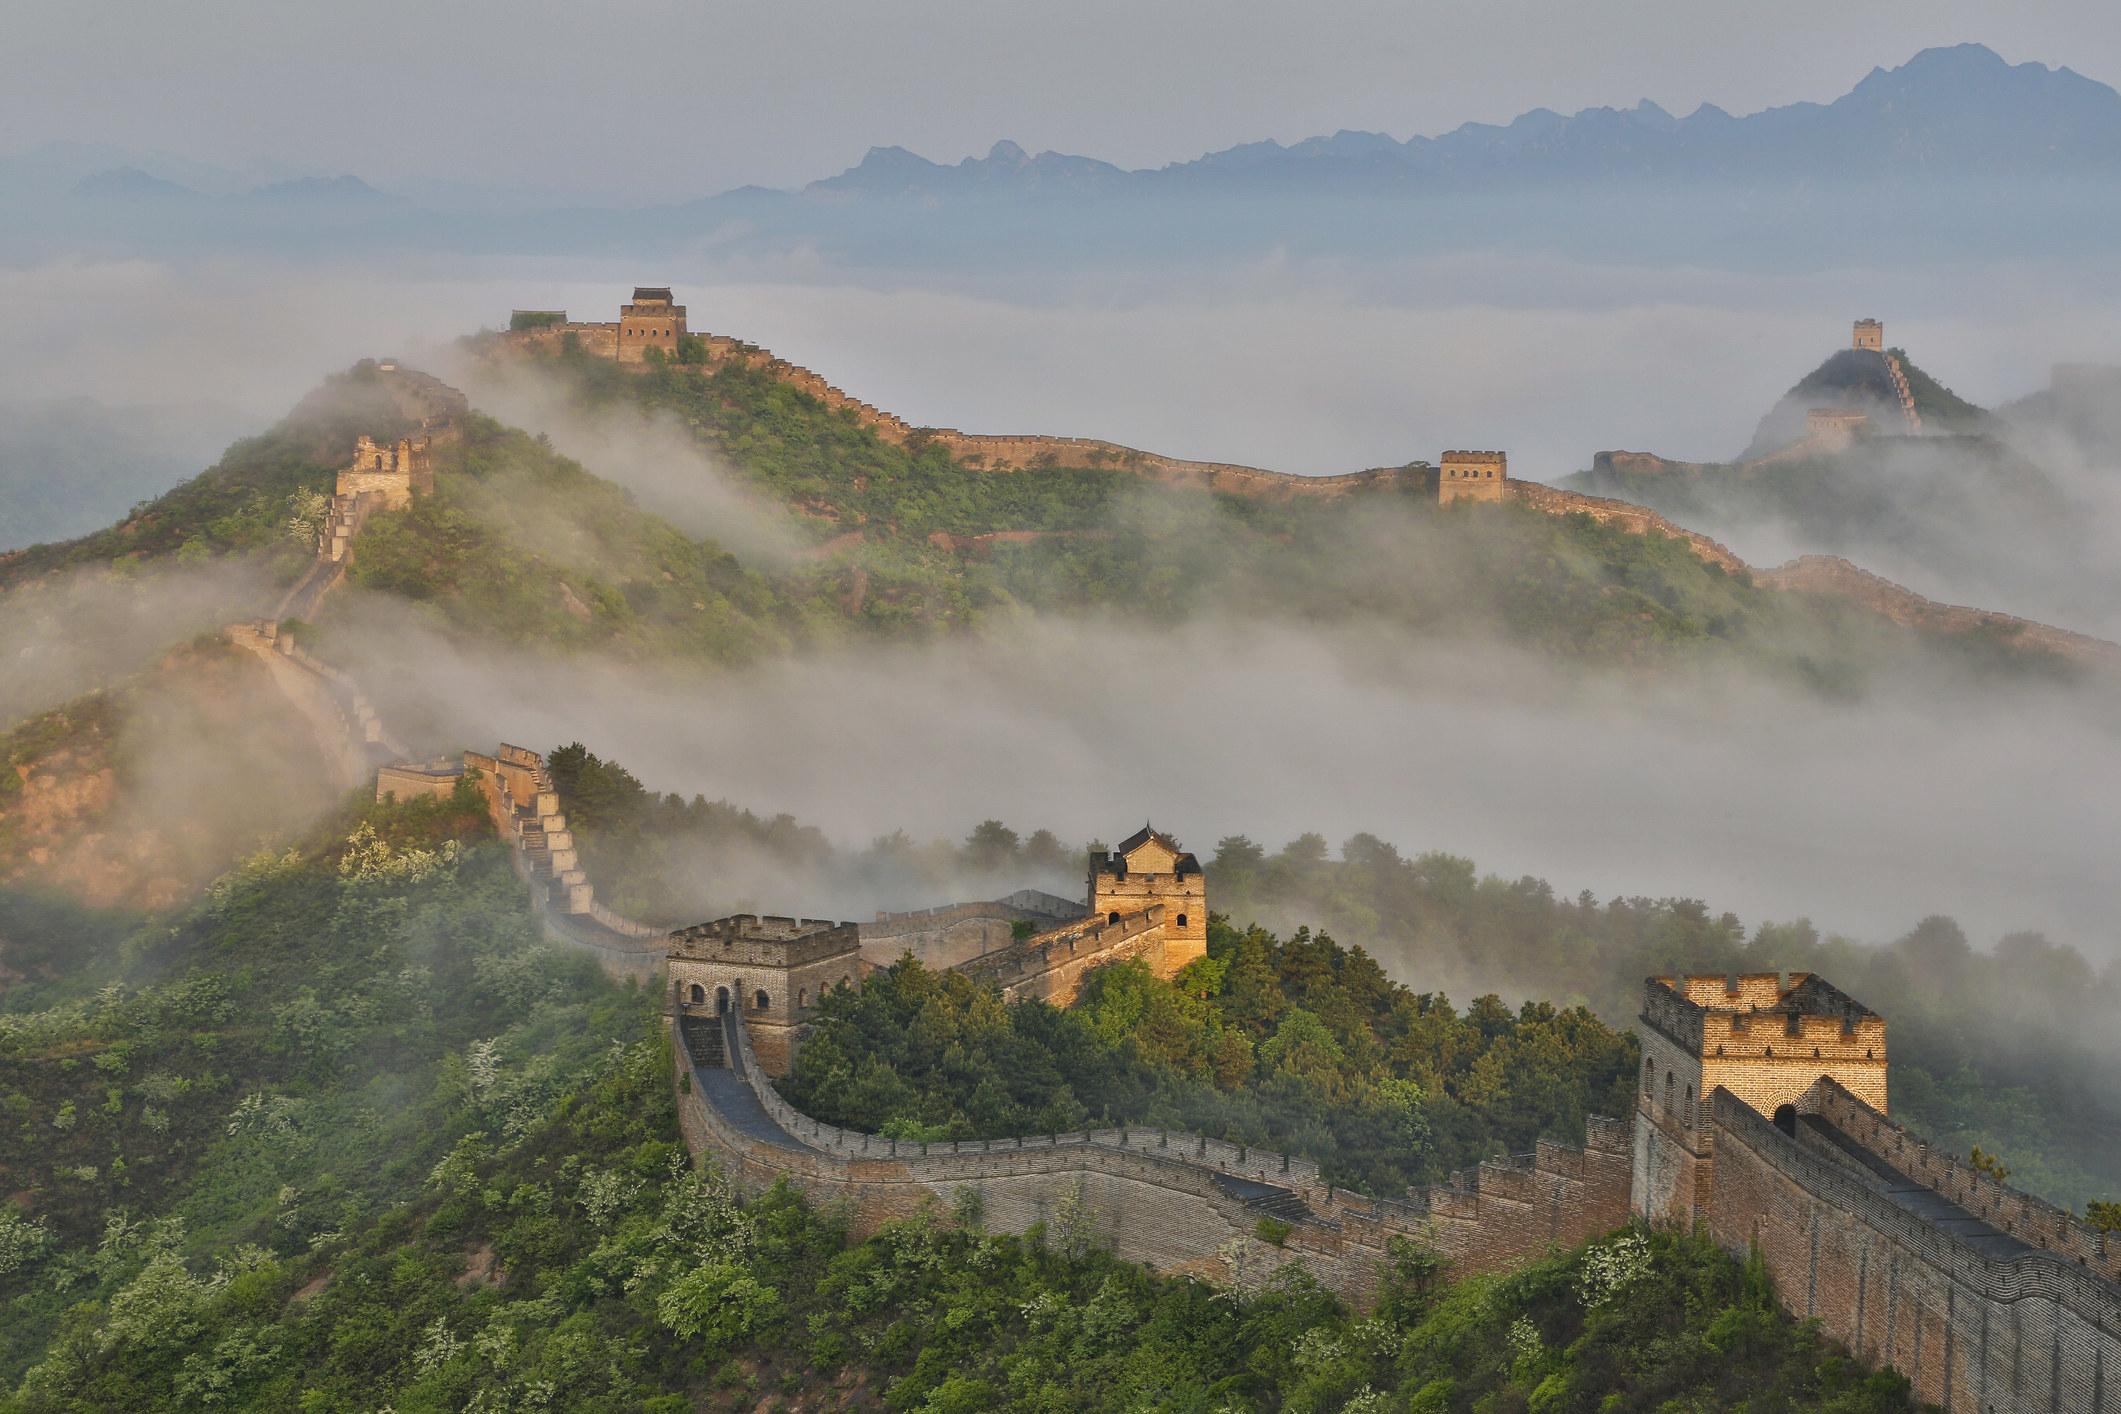 Clouds and fog over the Great Wall of China.